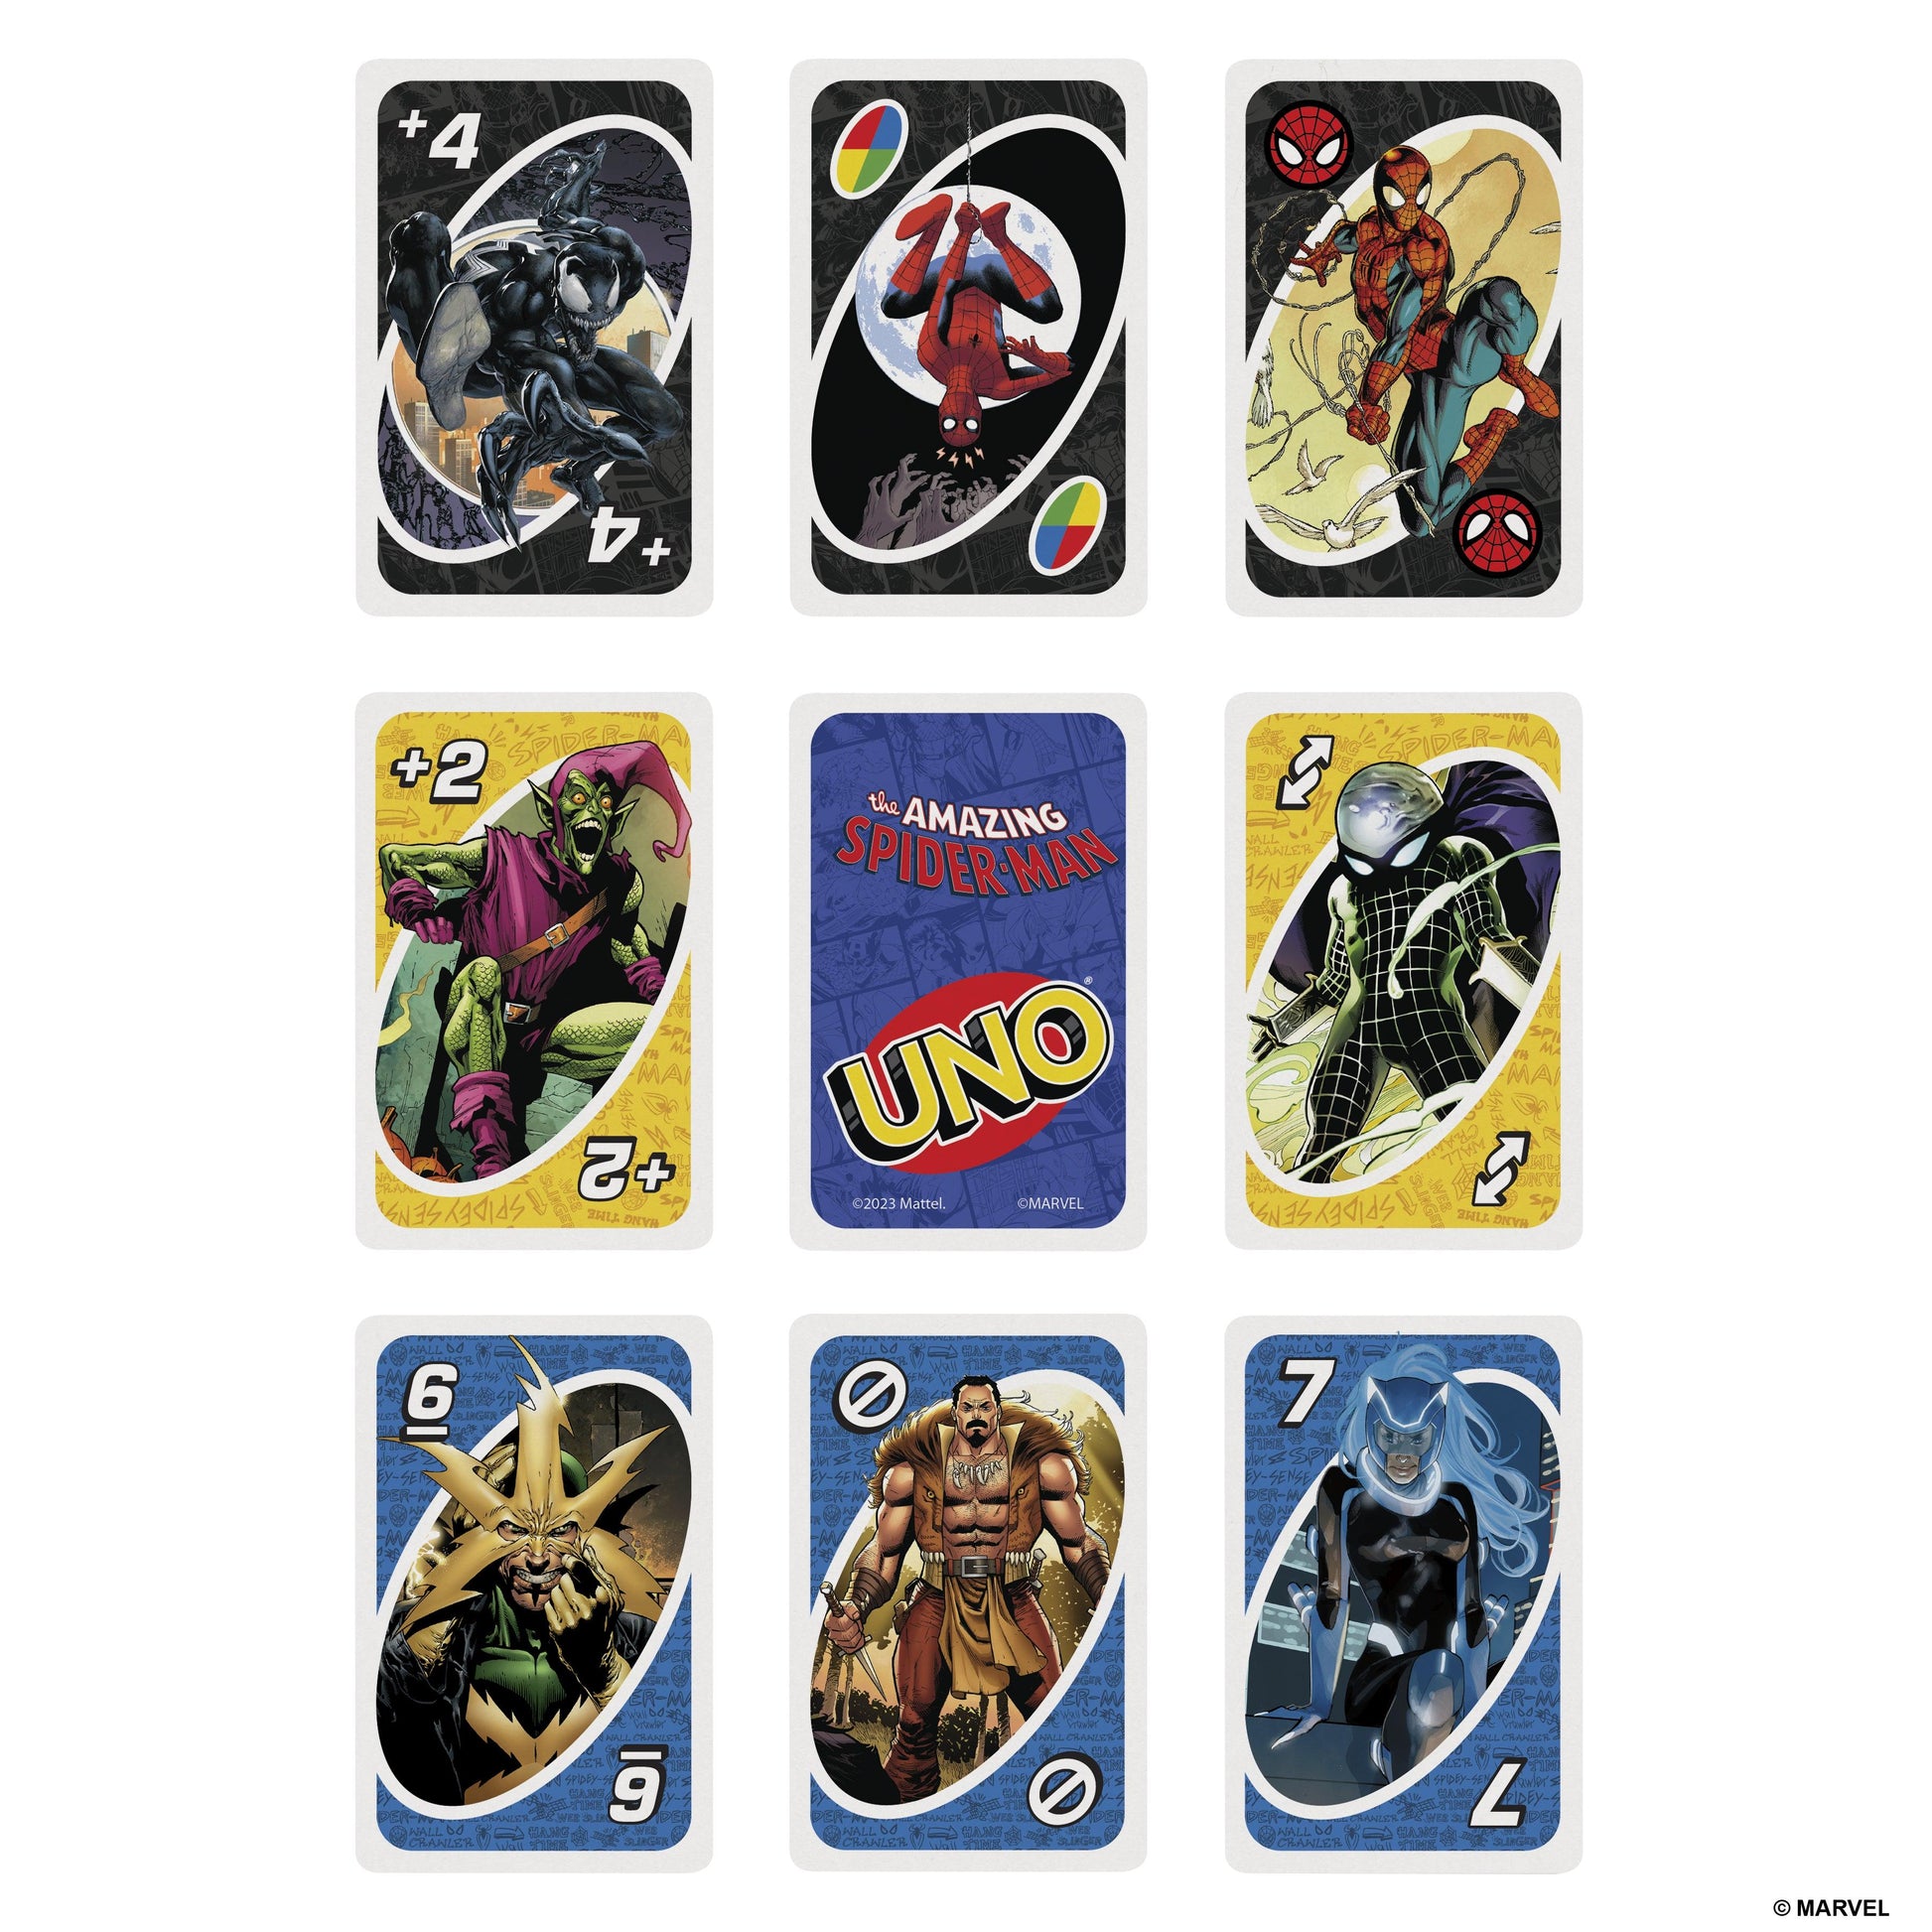 The Amazing Spider-Man Card Game UNO